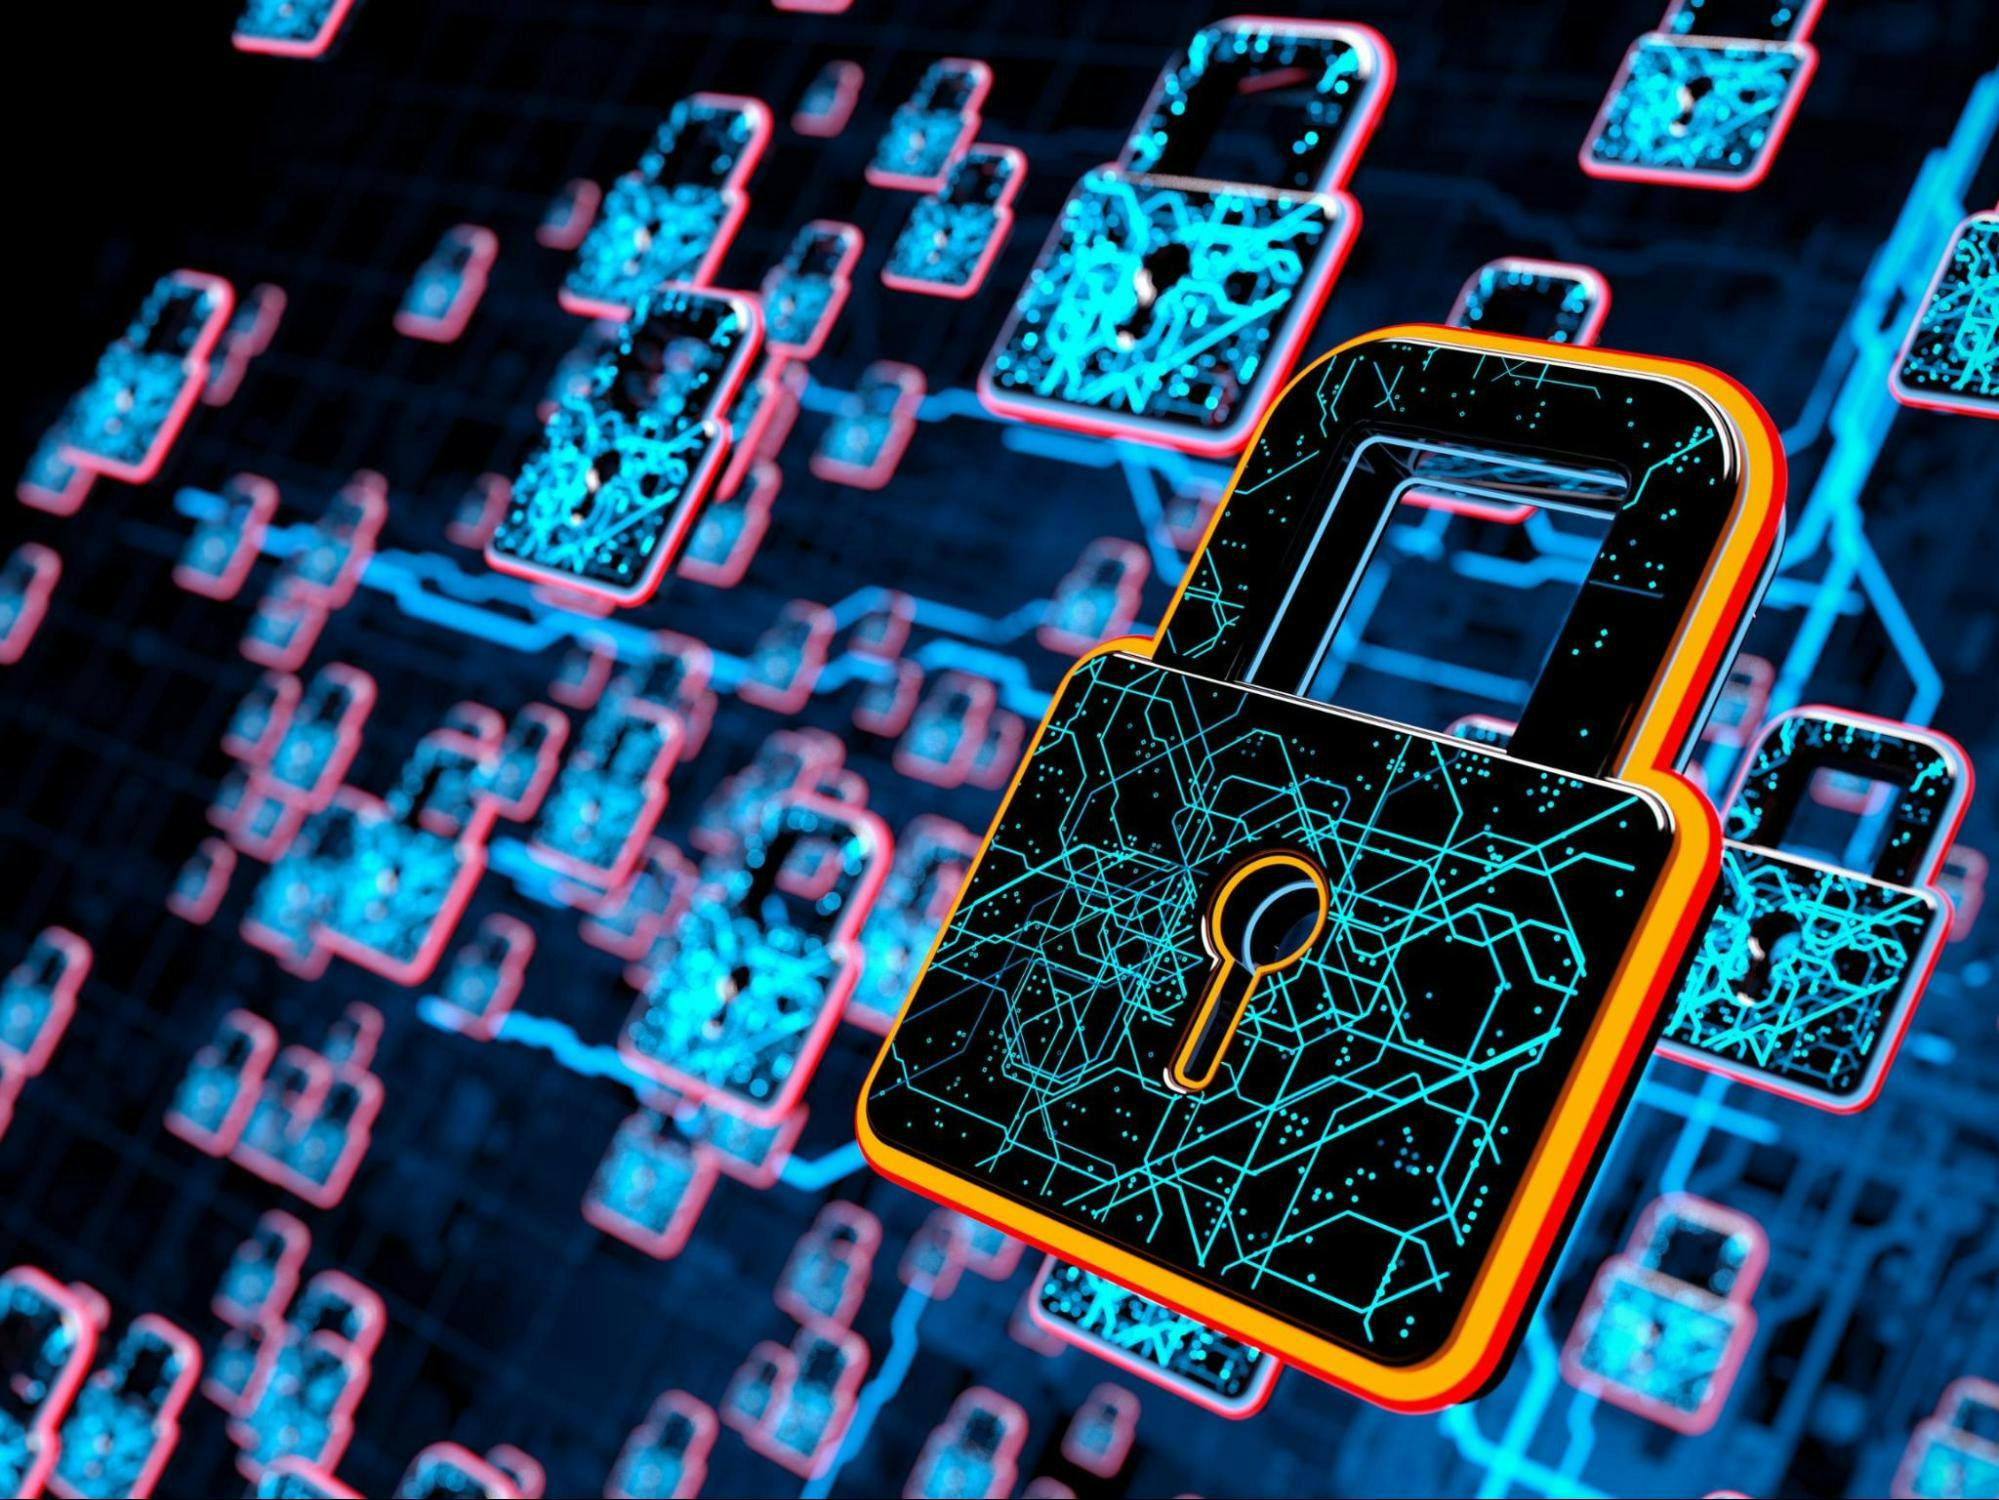 Stylized glowing padlocks overlaid with computer circuits, representing data security